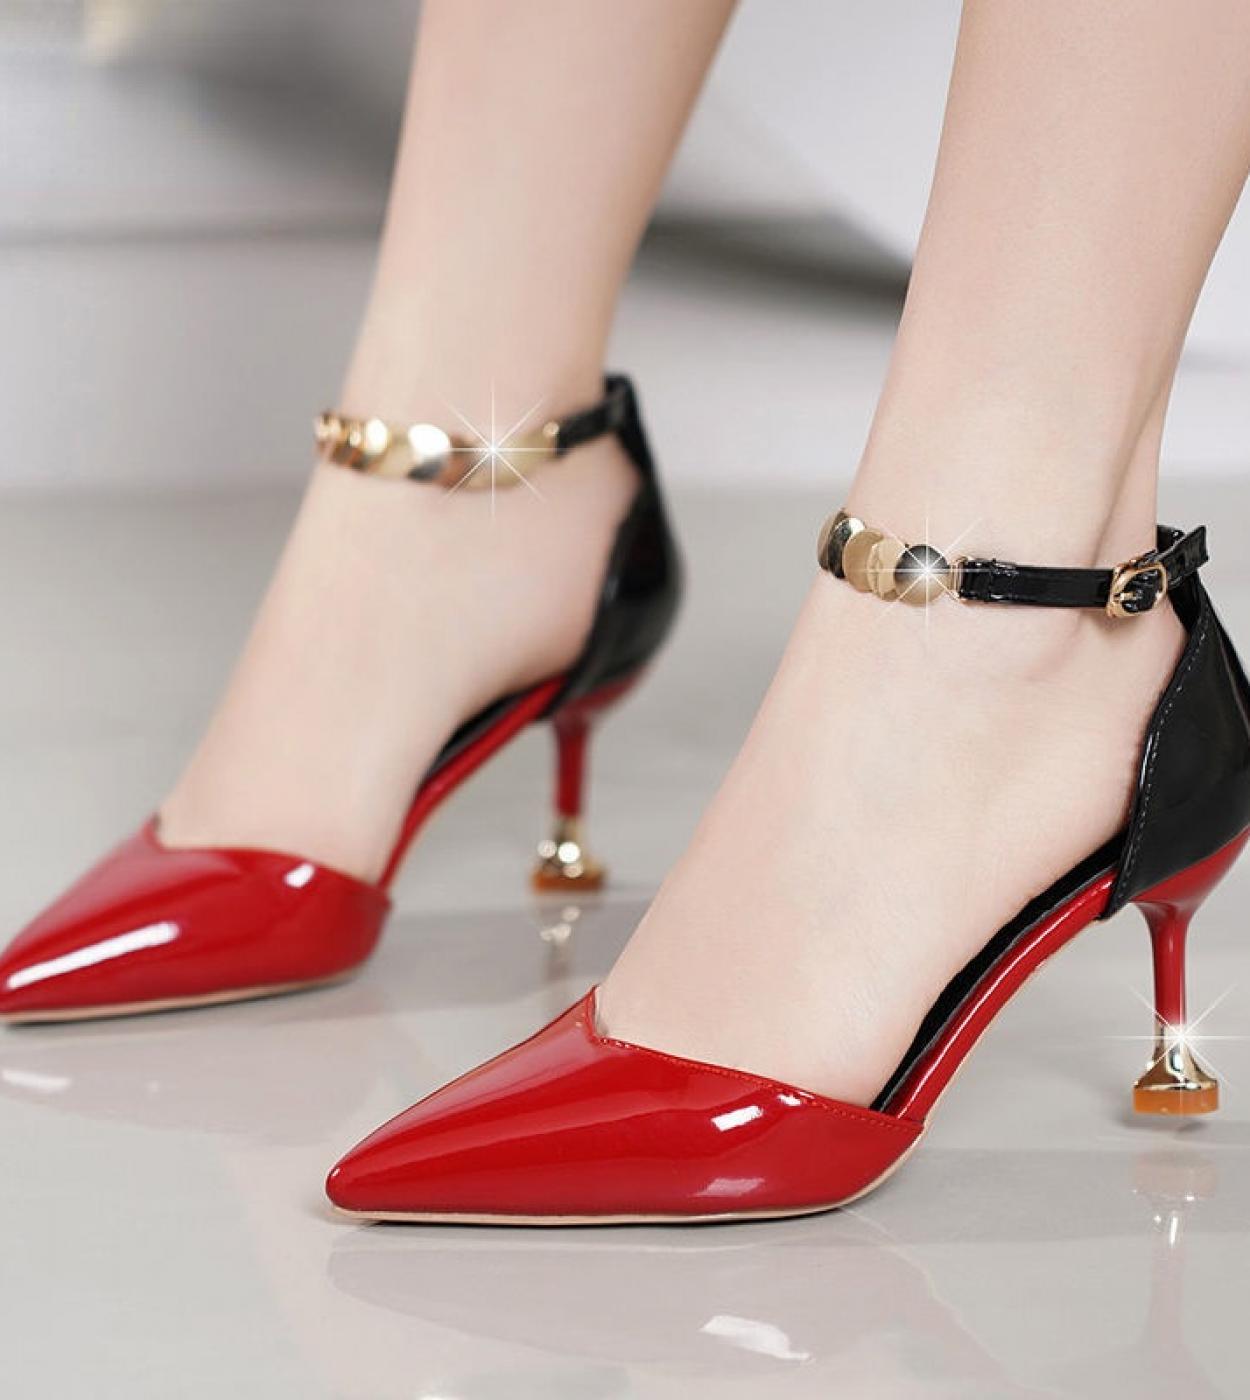 Zapatos De Mujer Women Fashion Sweet Pointed Toe Buckles Strap Stiletto Heels Lady Cool Red Party Heel Shoes  White Heel